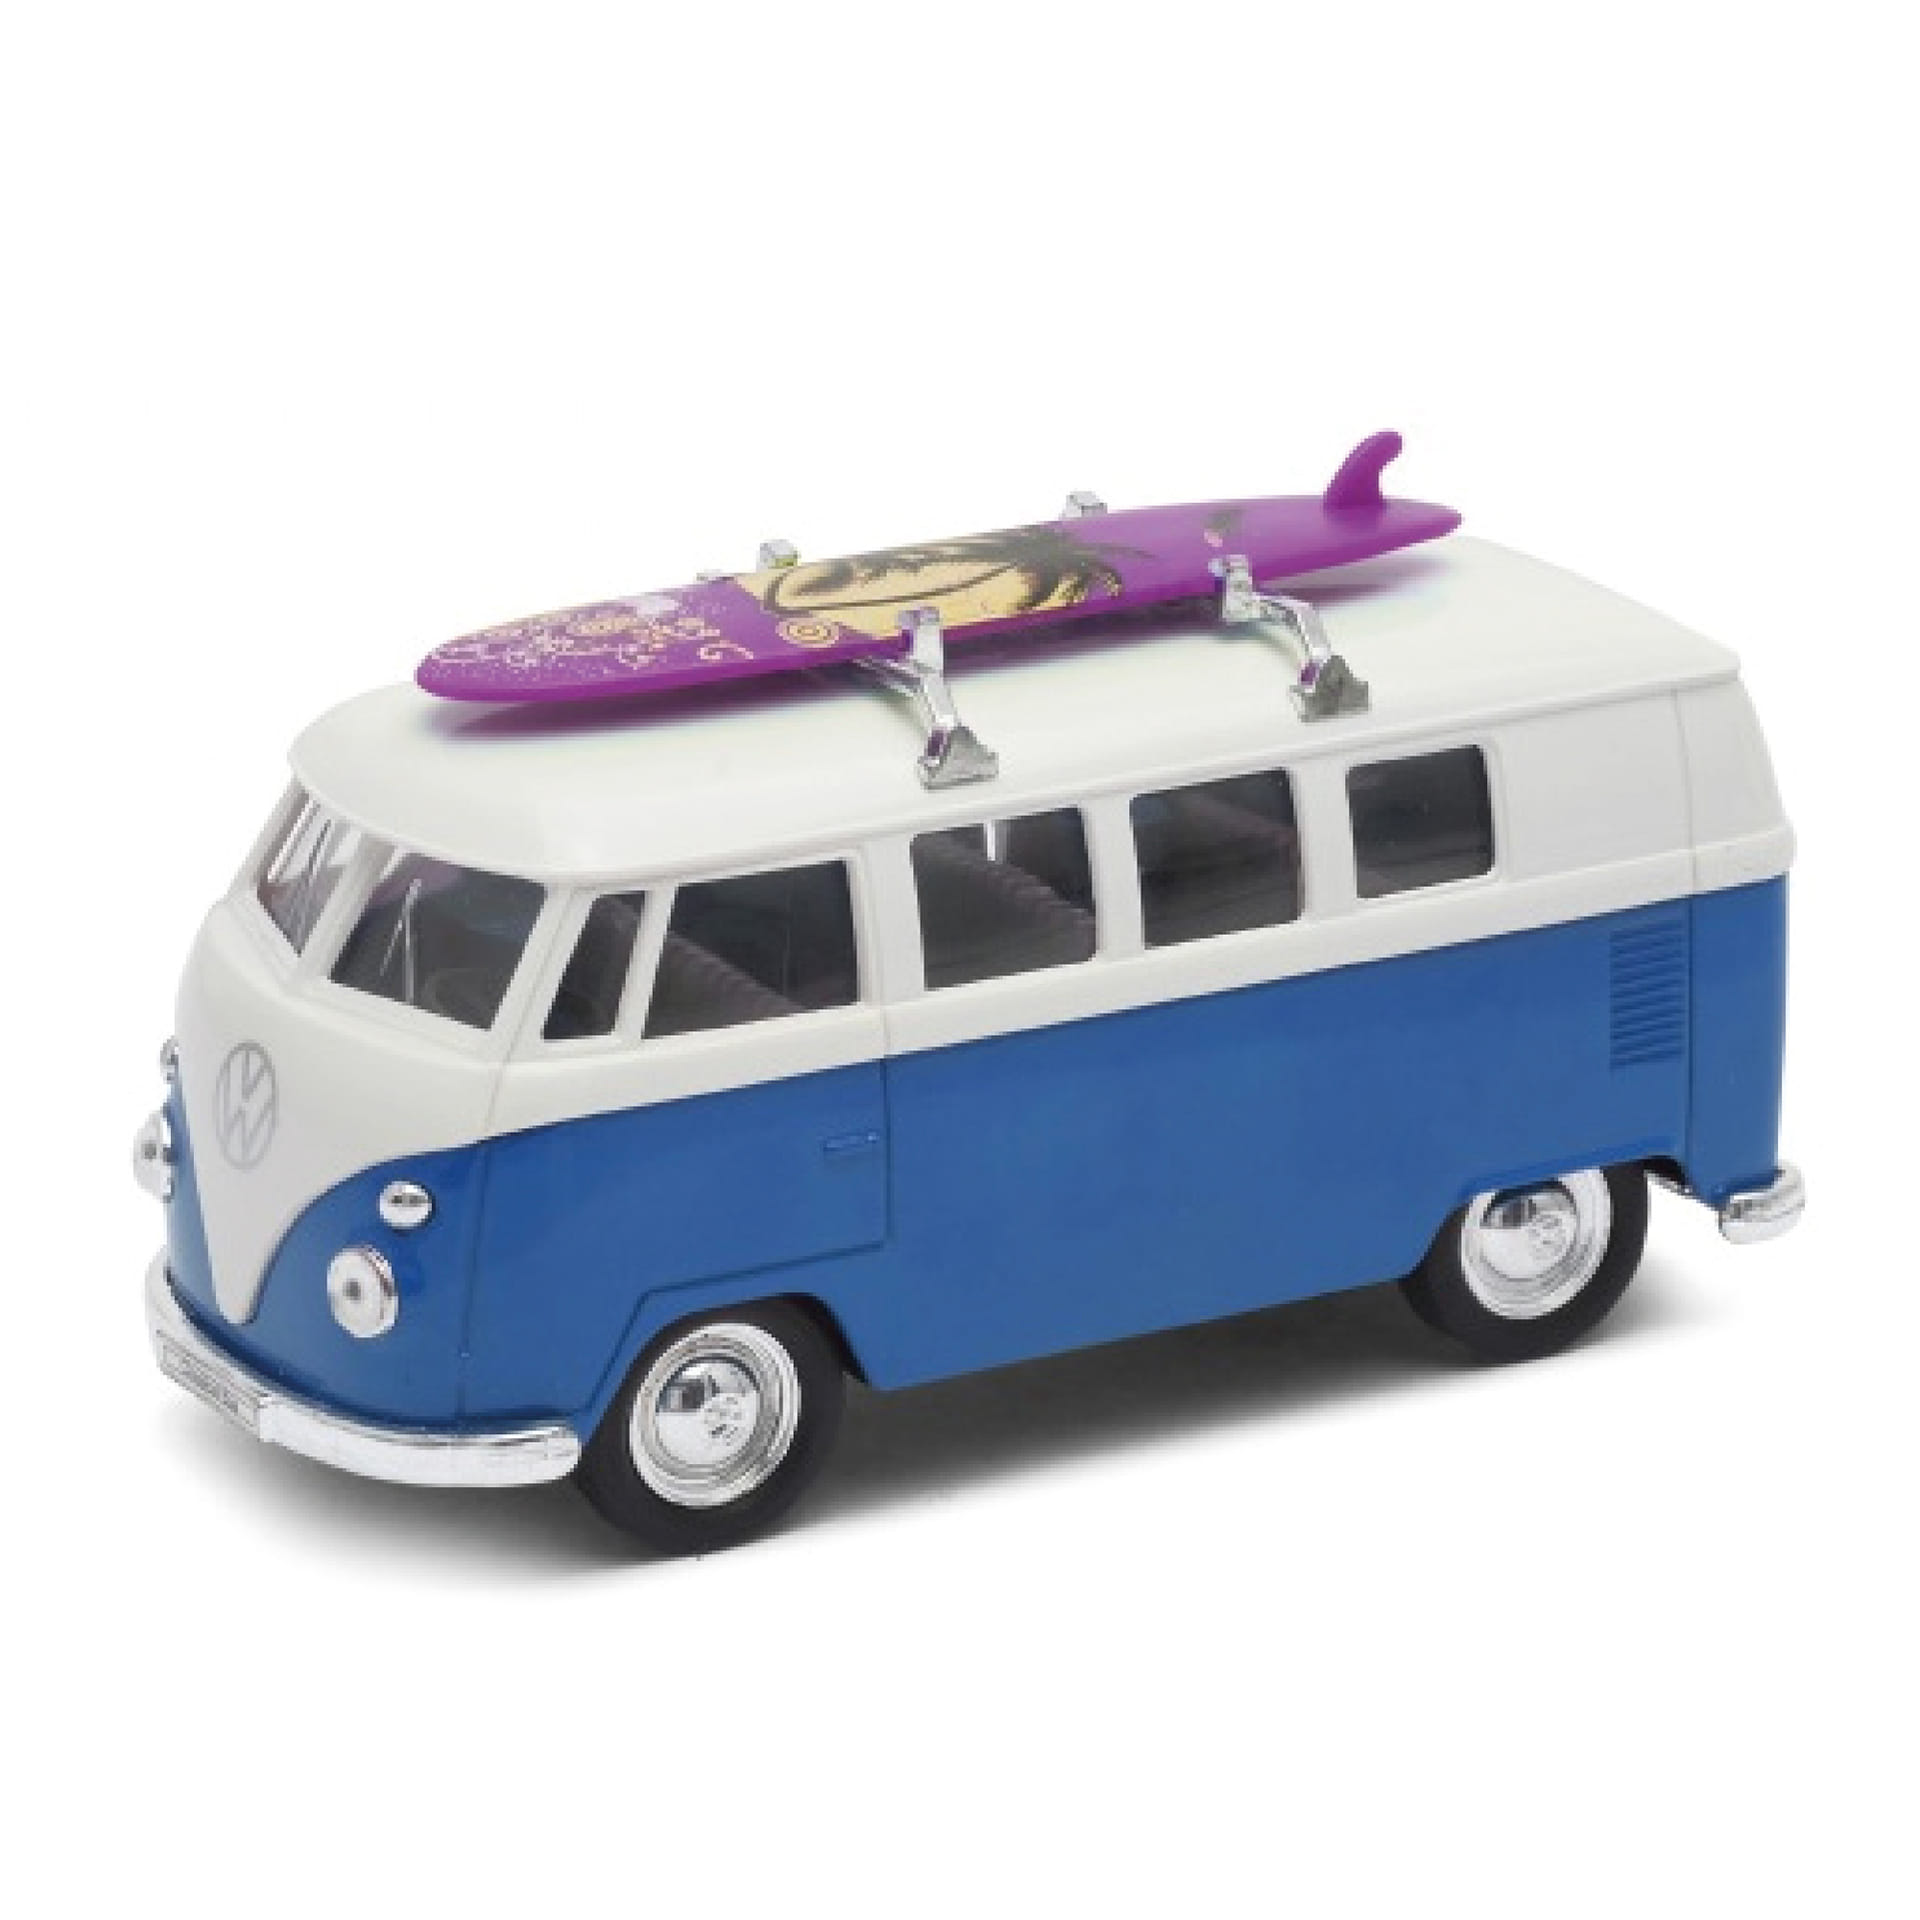 VW Camper with Surfboard